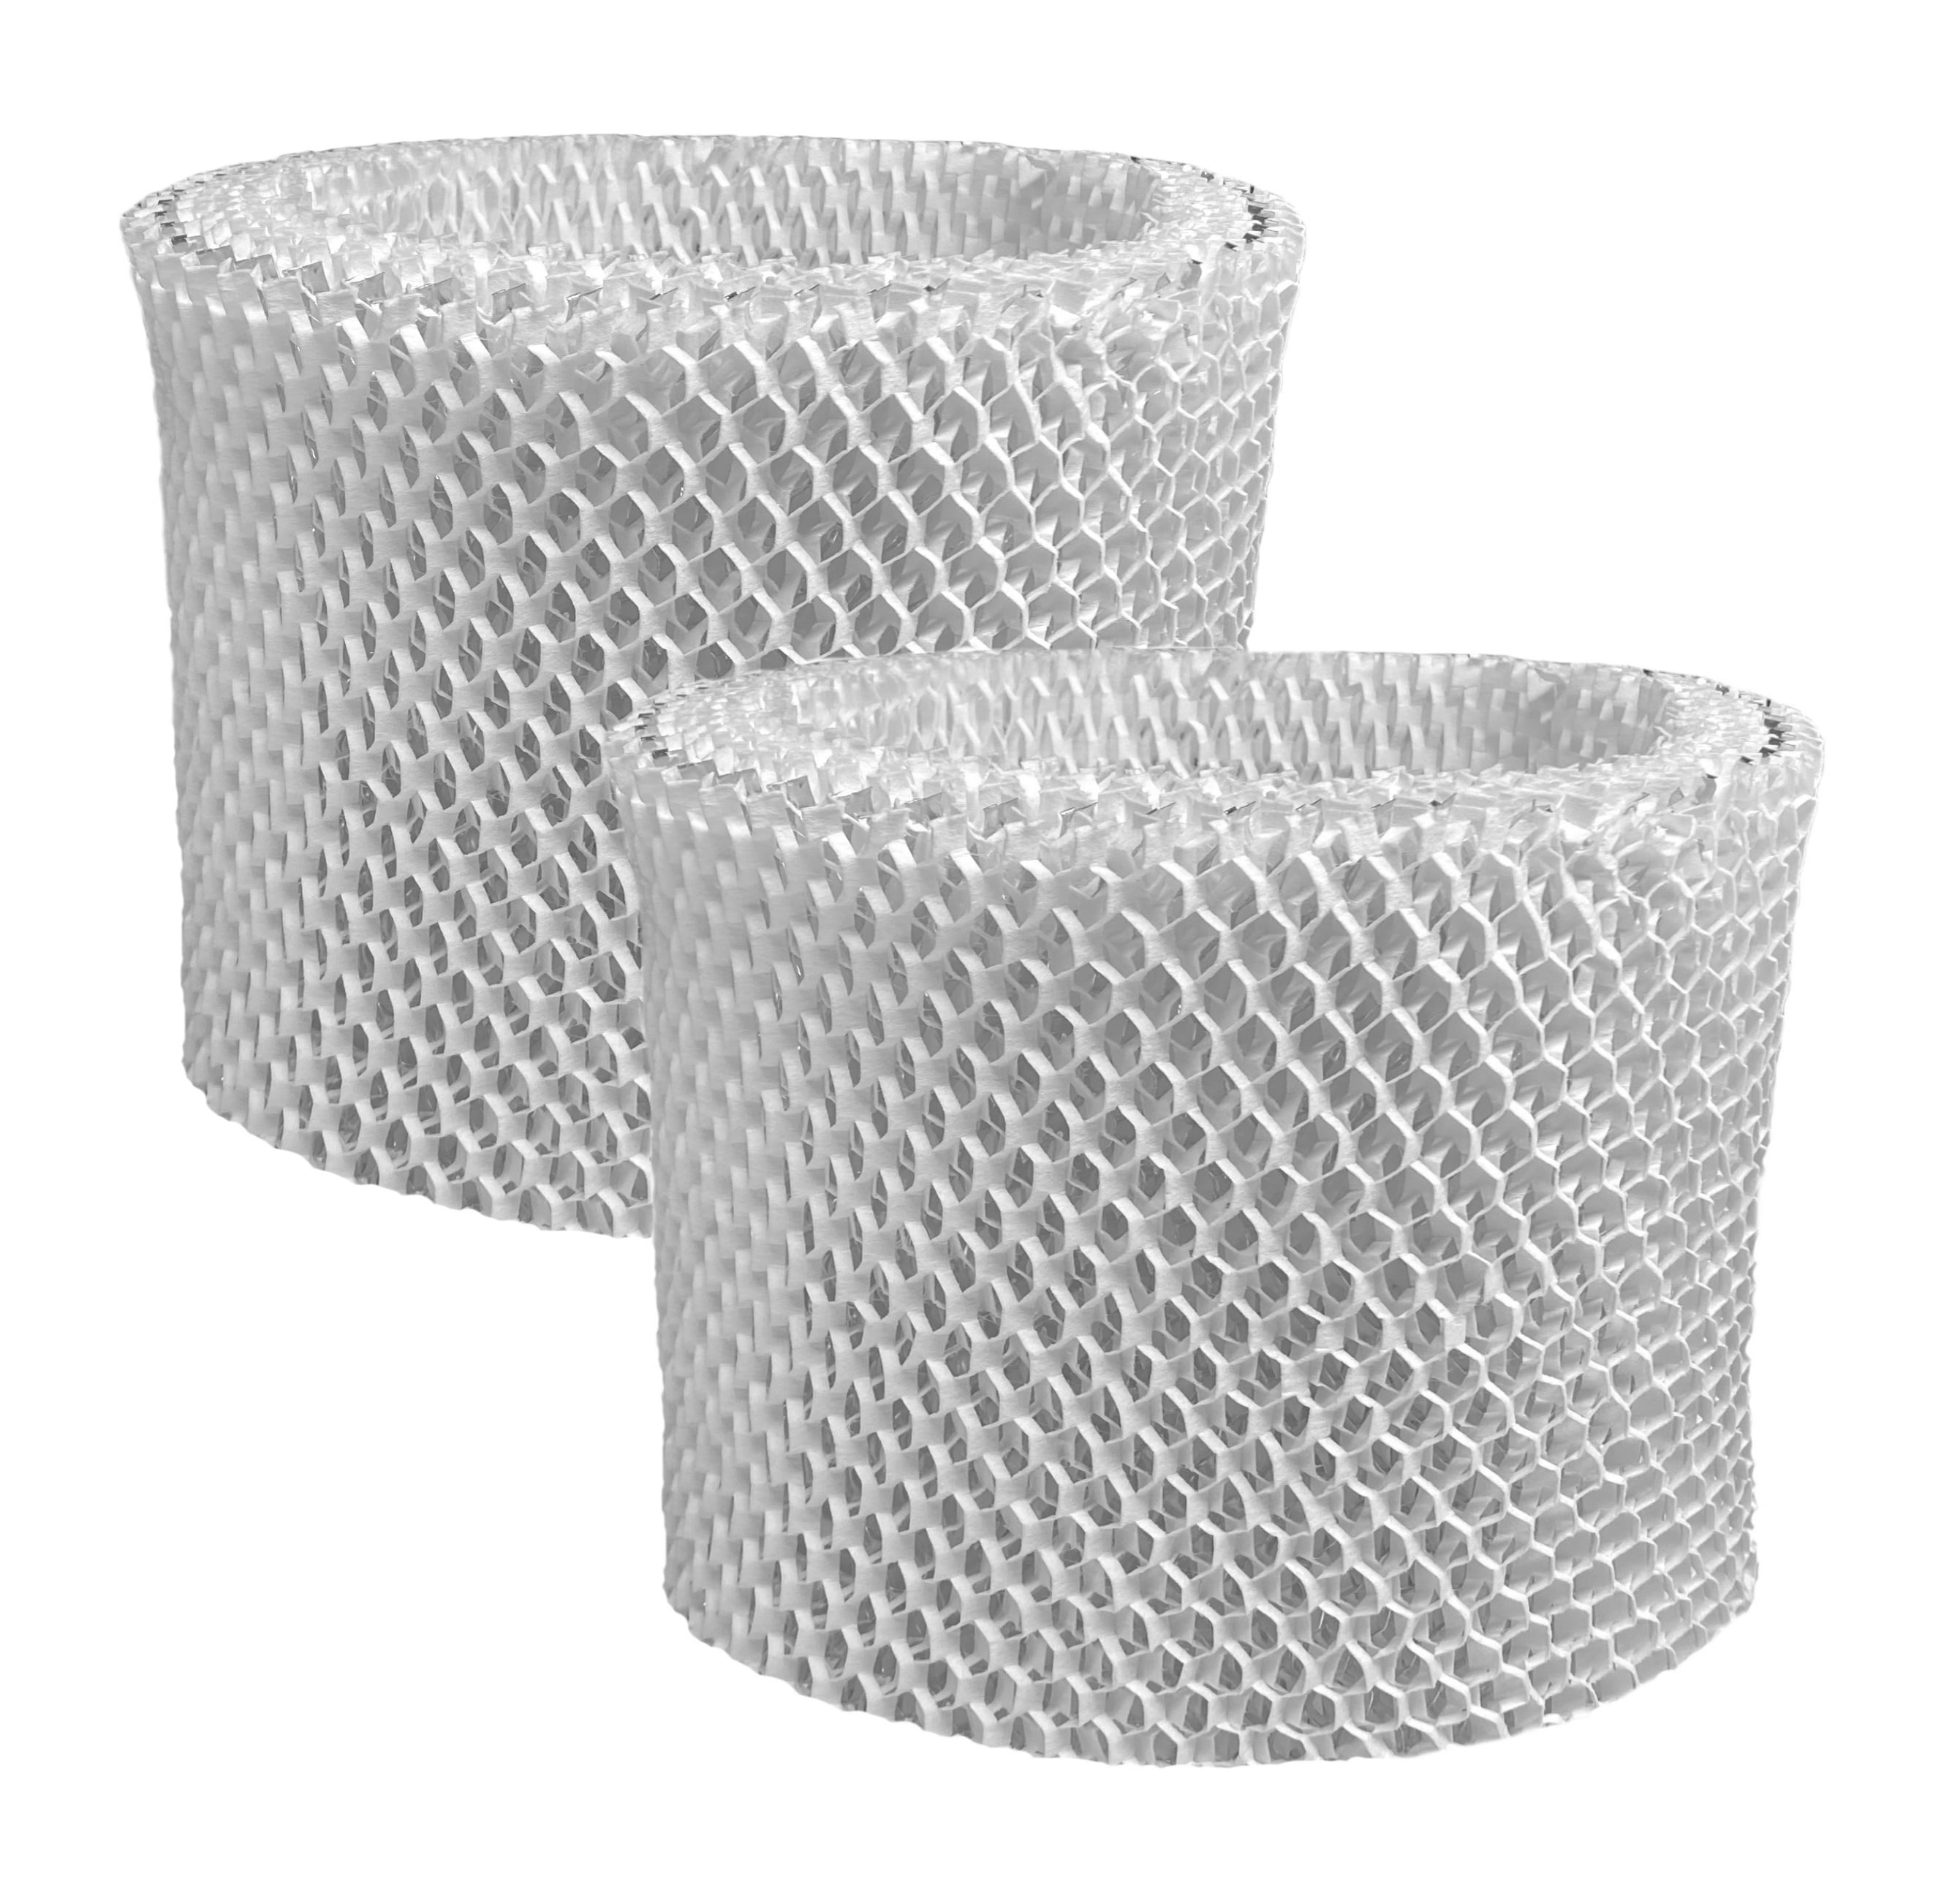 Humidifier Wick Filter for Kenmore 14410 15412 14411 154120 2 Pack 